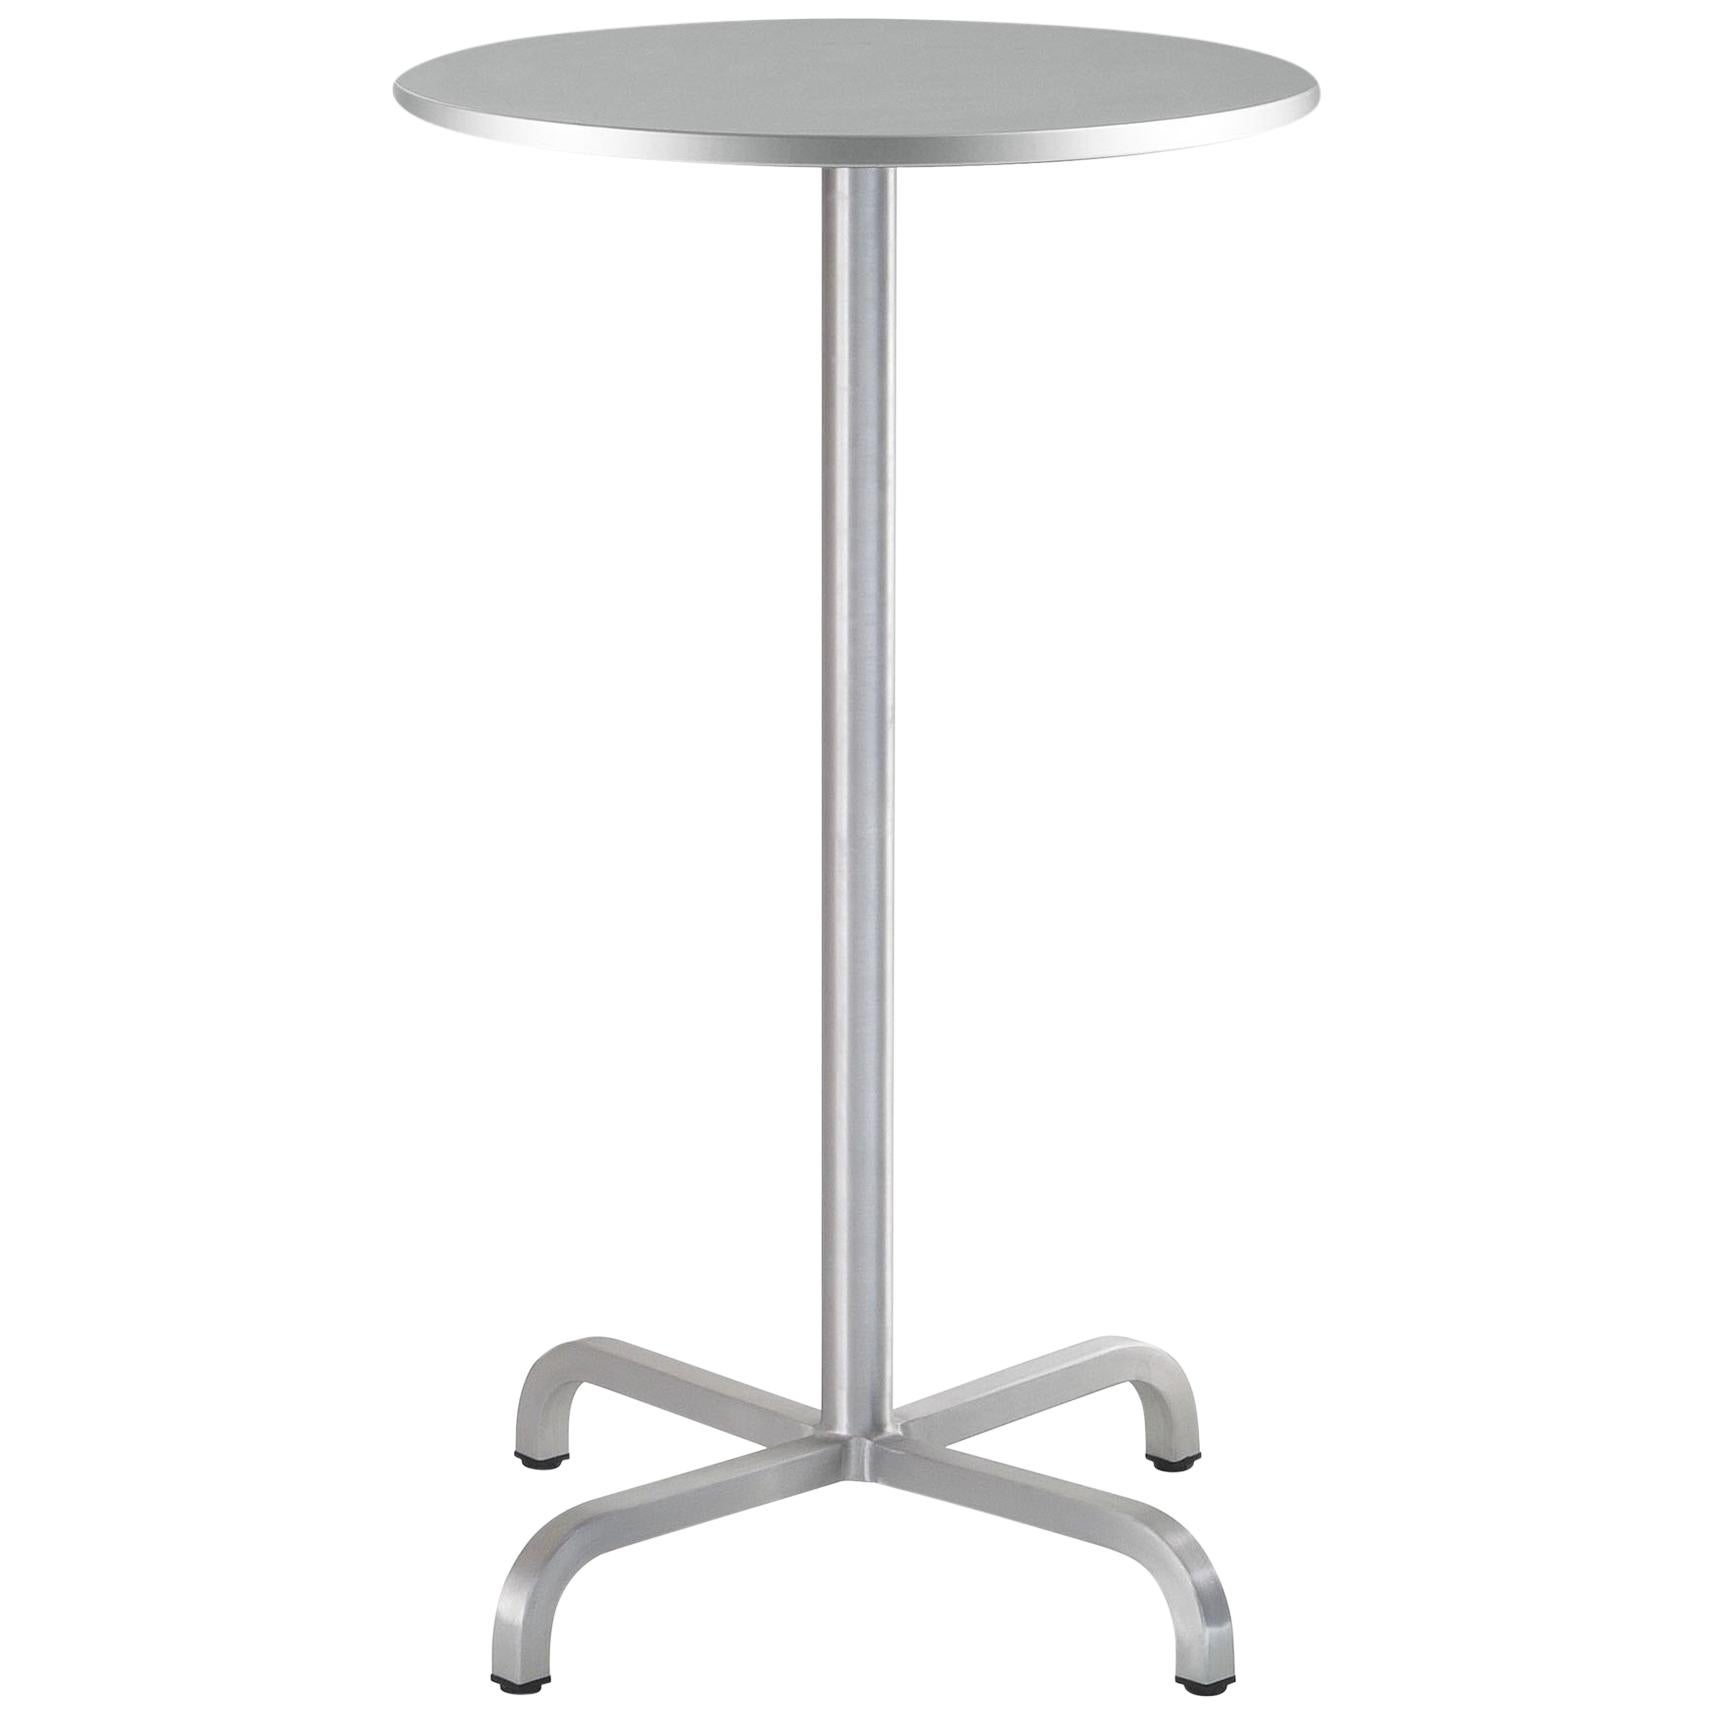 Emeco 20-06 Small Round Bar Table with Gray Laminate Top by Norman Foster For Sale